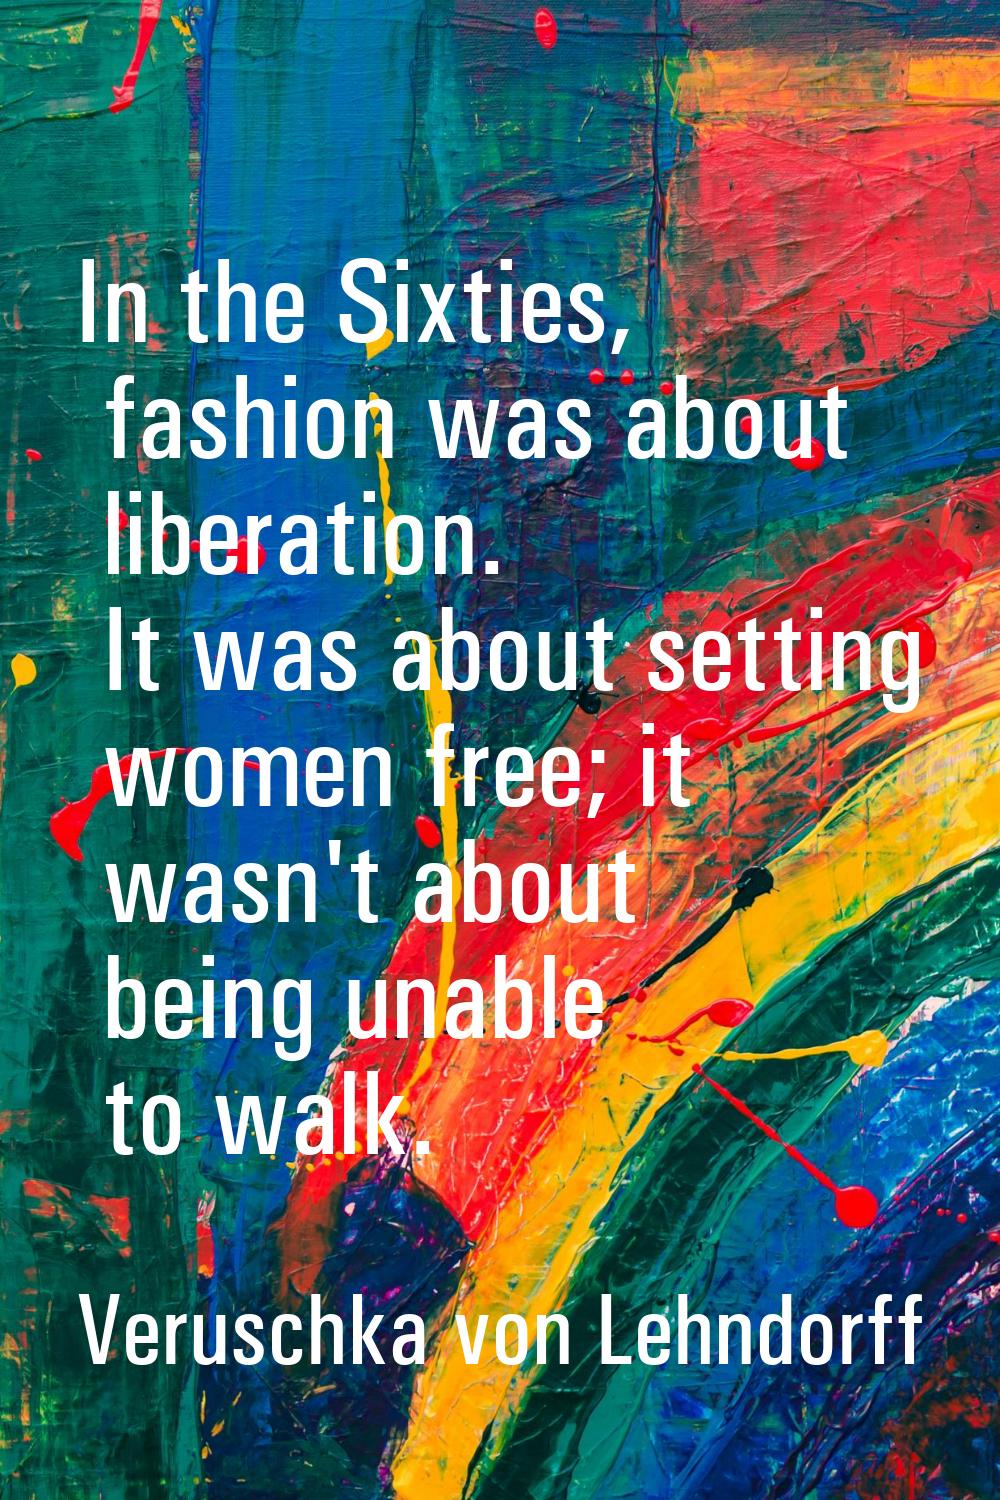 In the Sixties, fashion was about liberation. It was about setting women free; it wasn't about bein